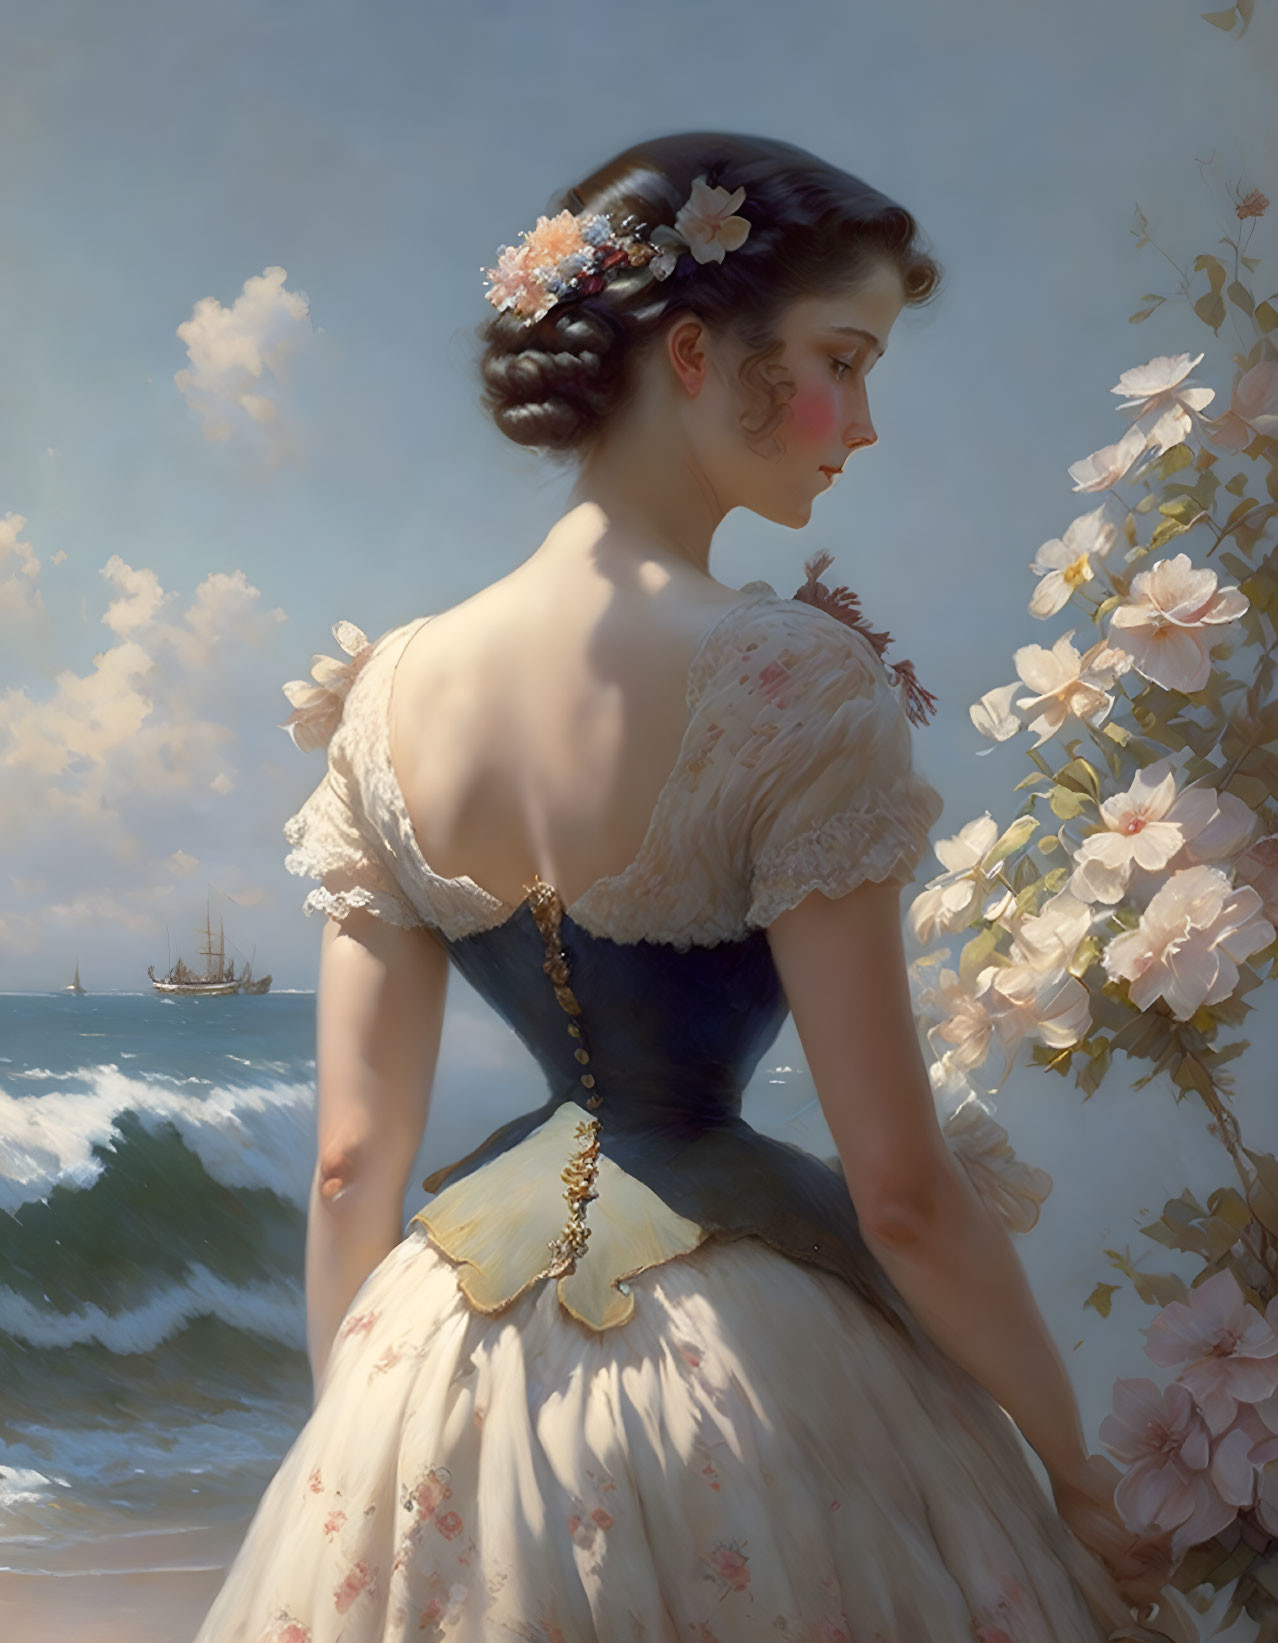 Woman in white and blue dress by the sea with flowers in her hair